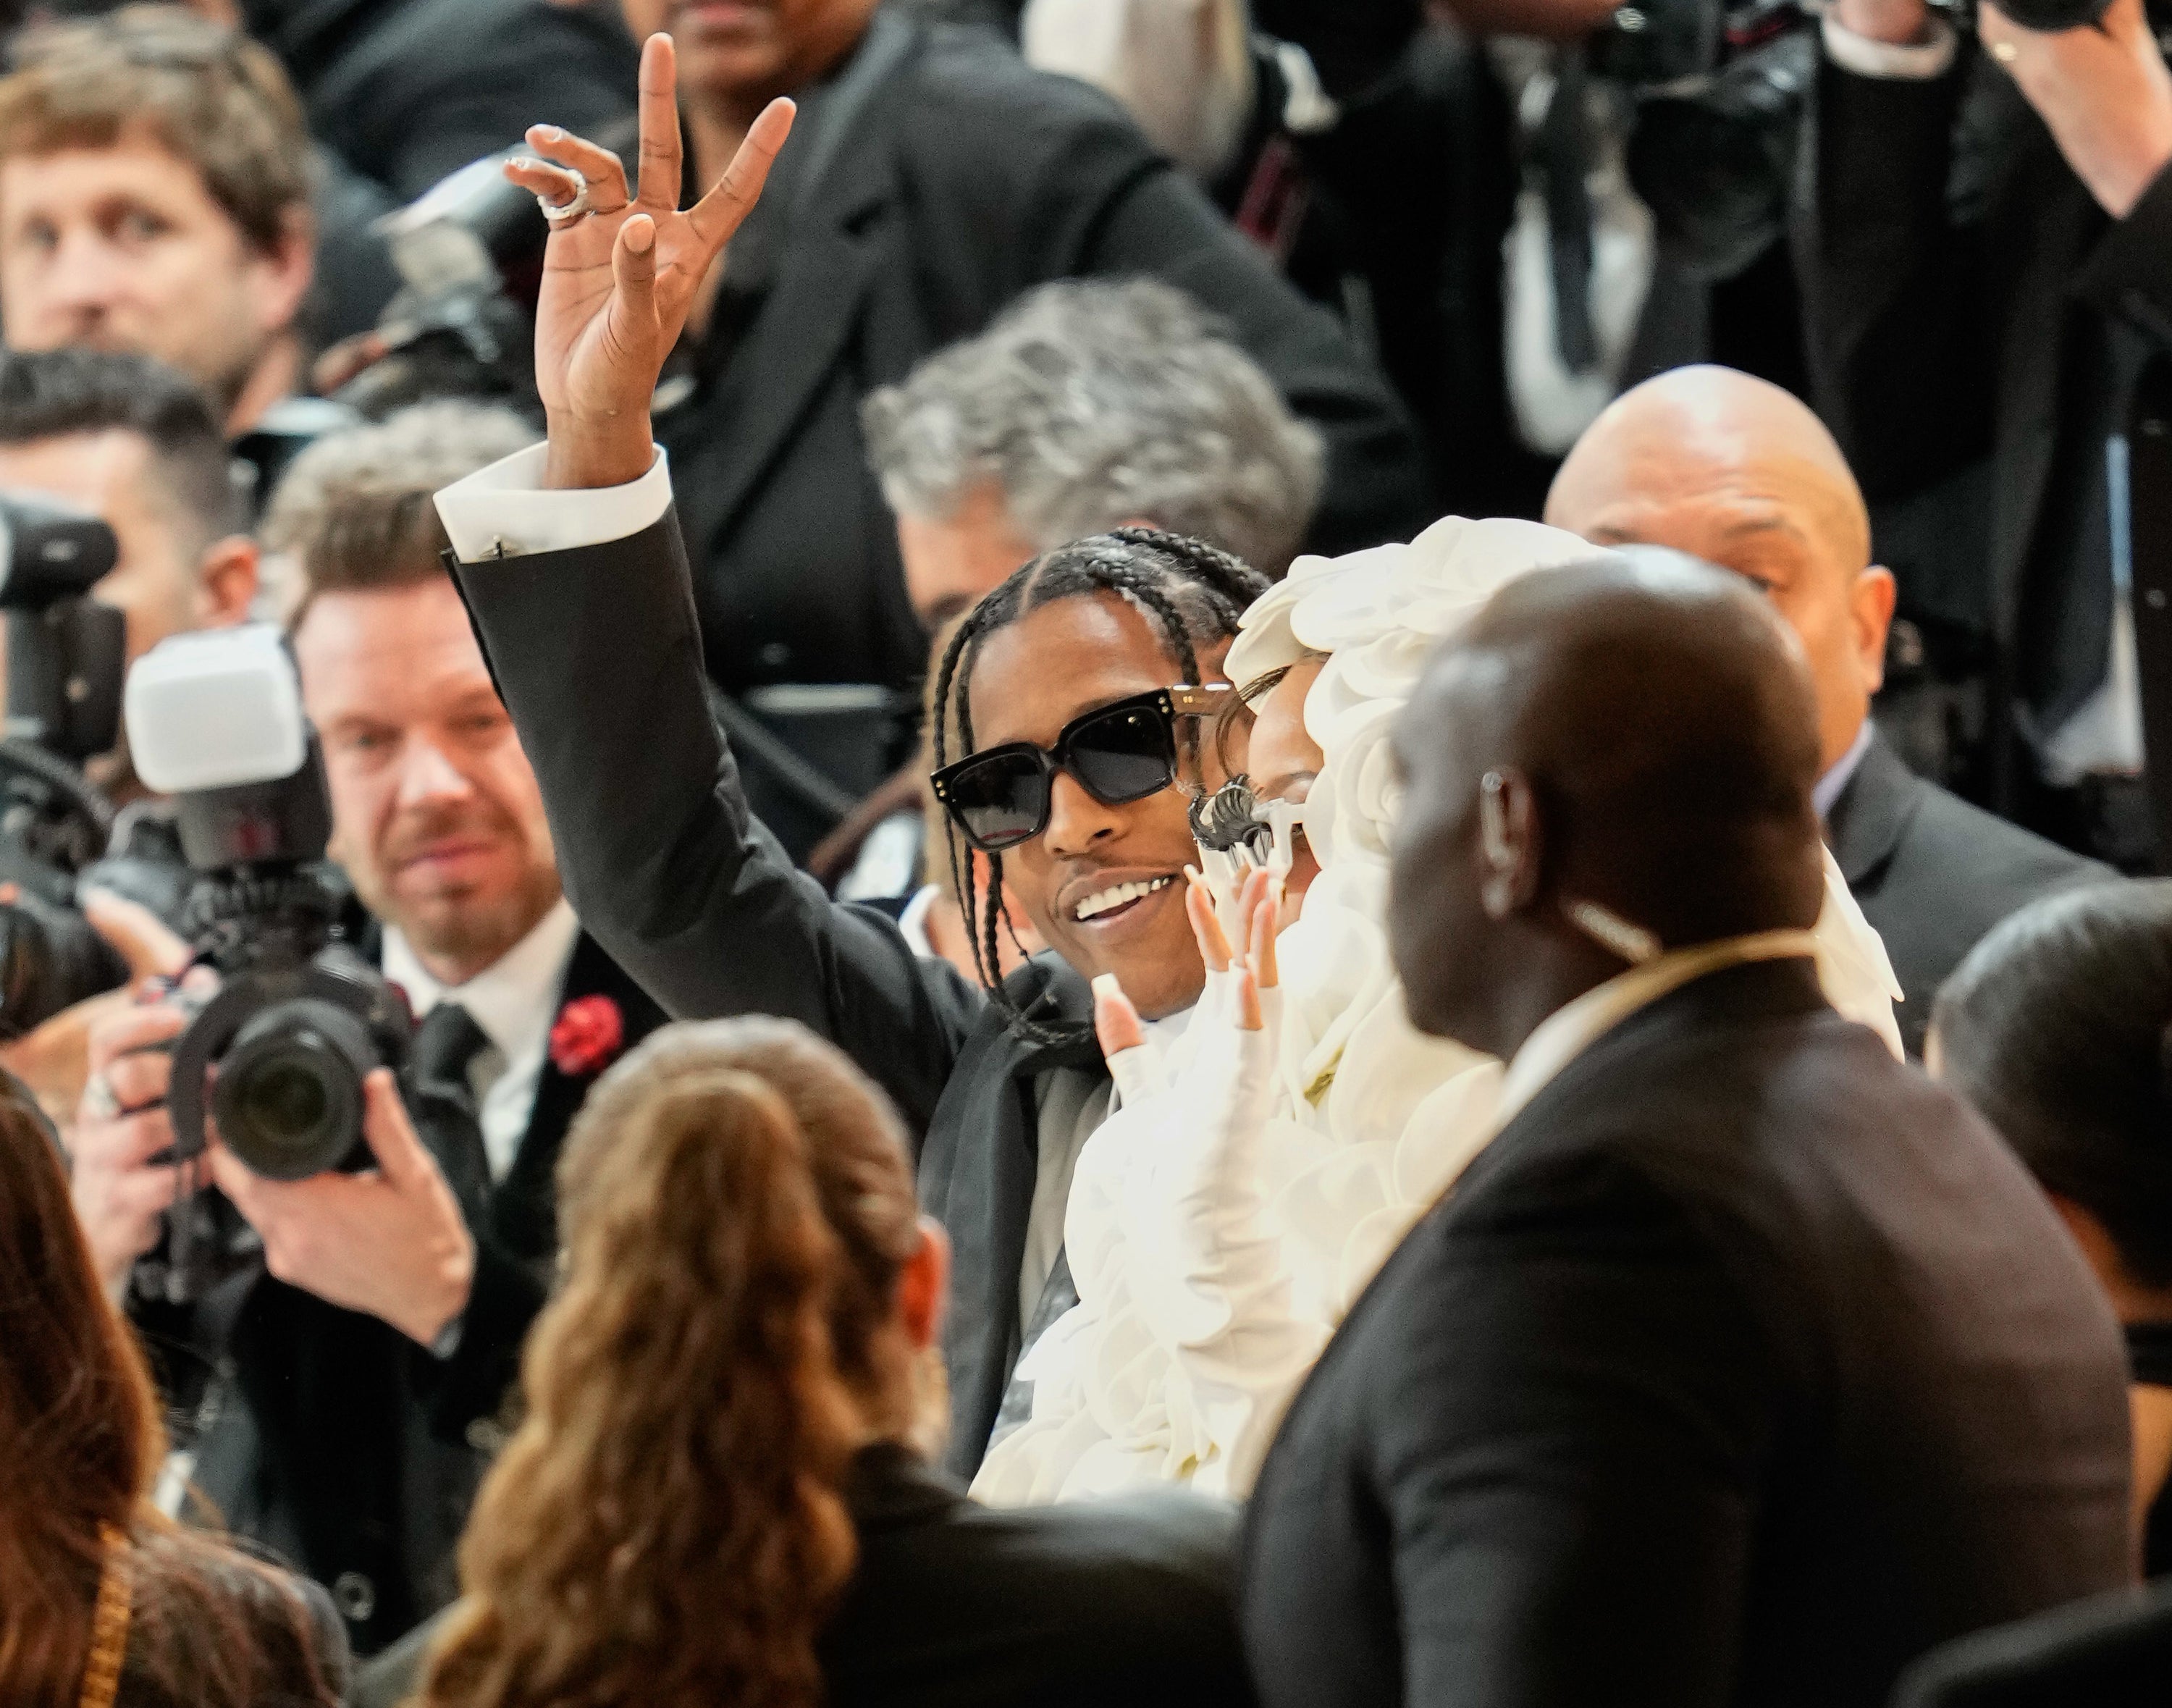 ASAP holds his hand up in the middle of a group of photographers